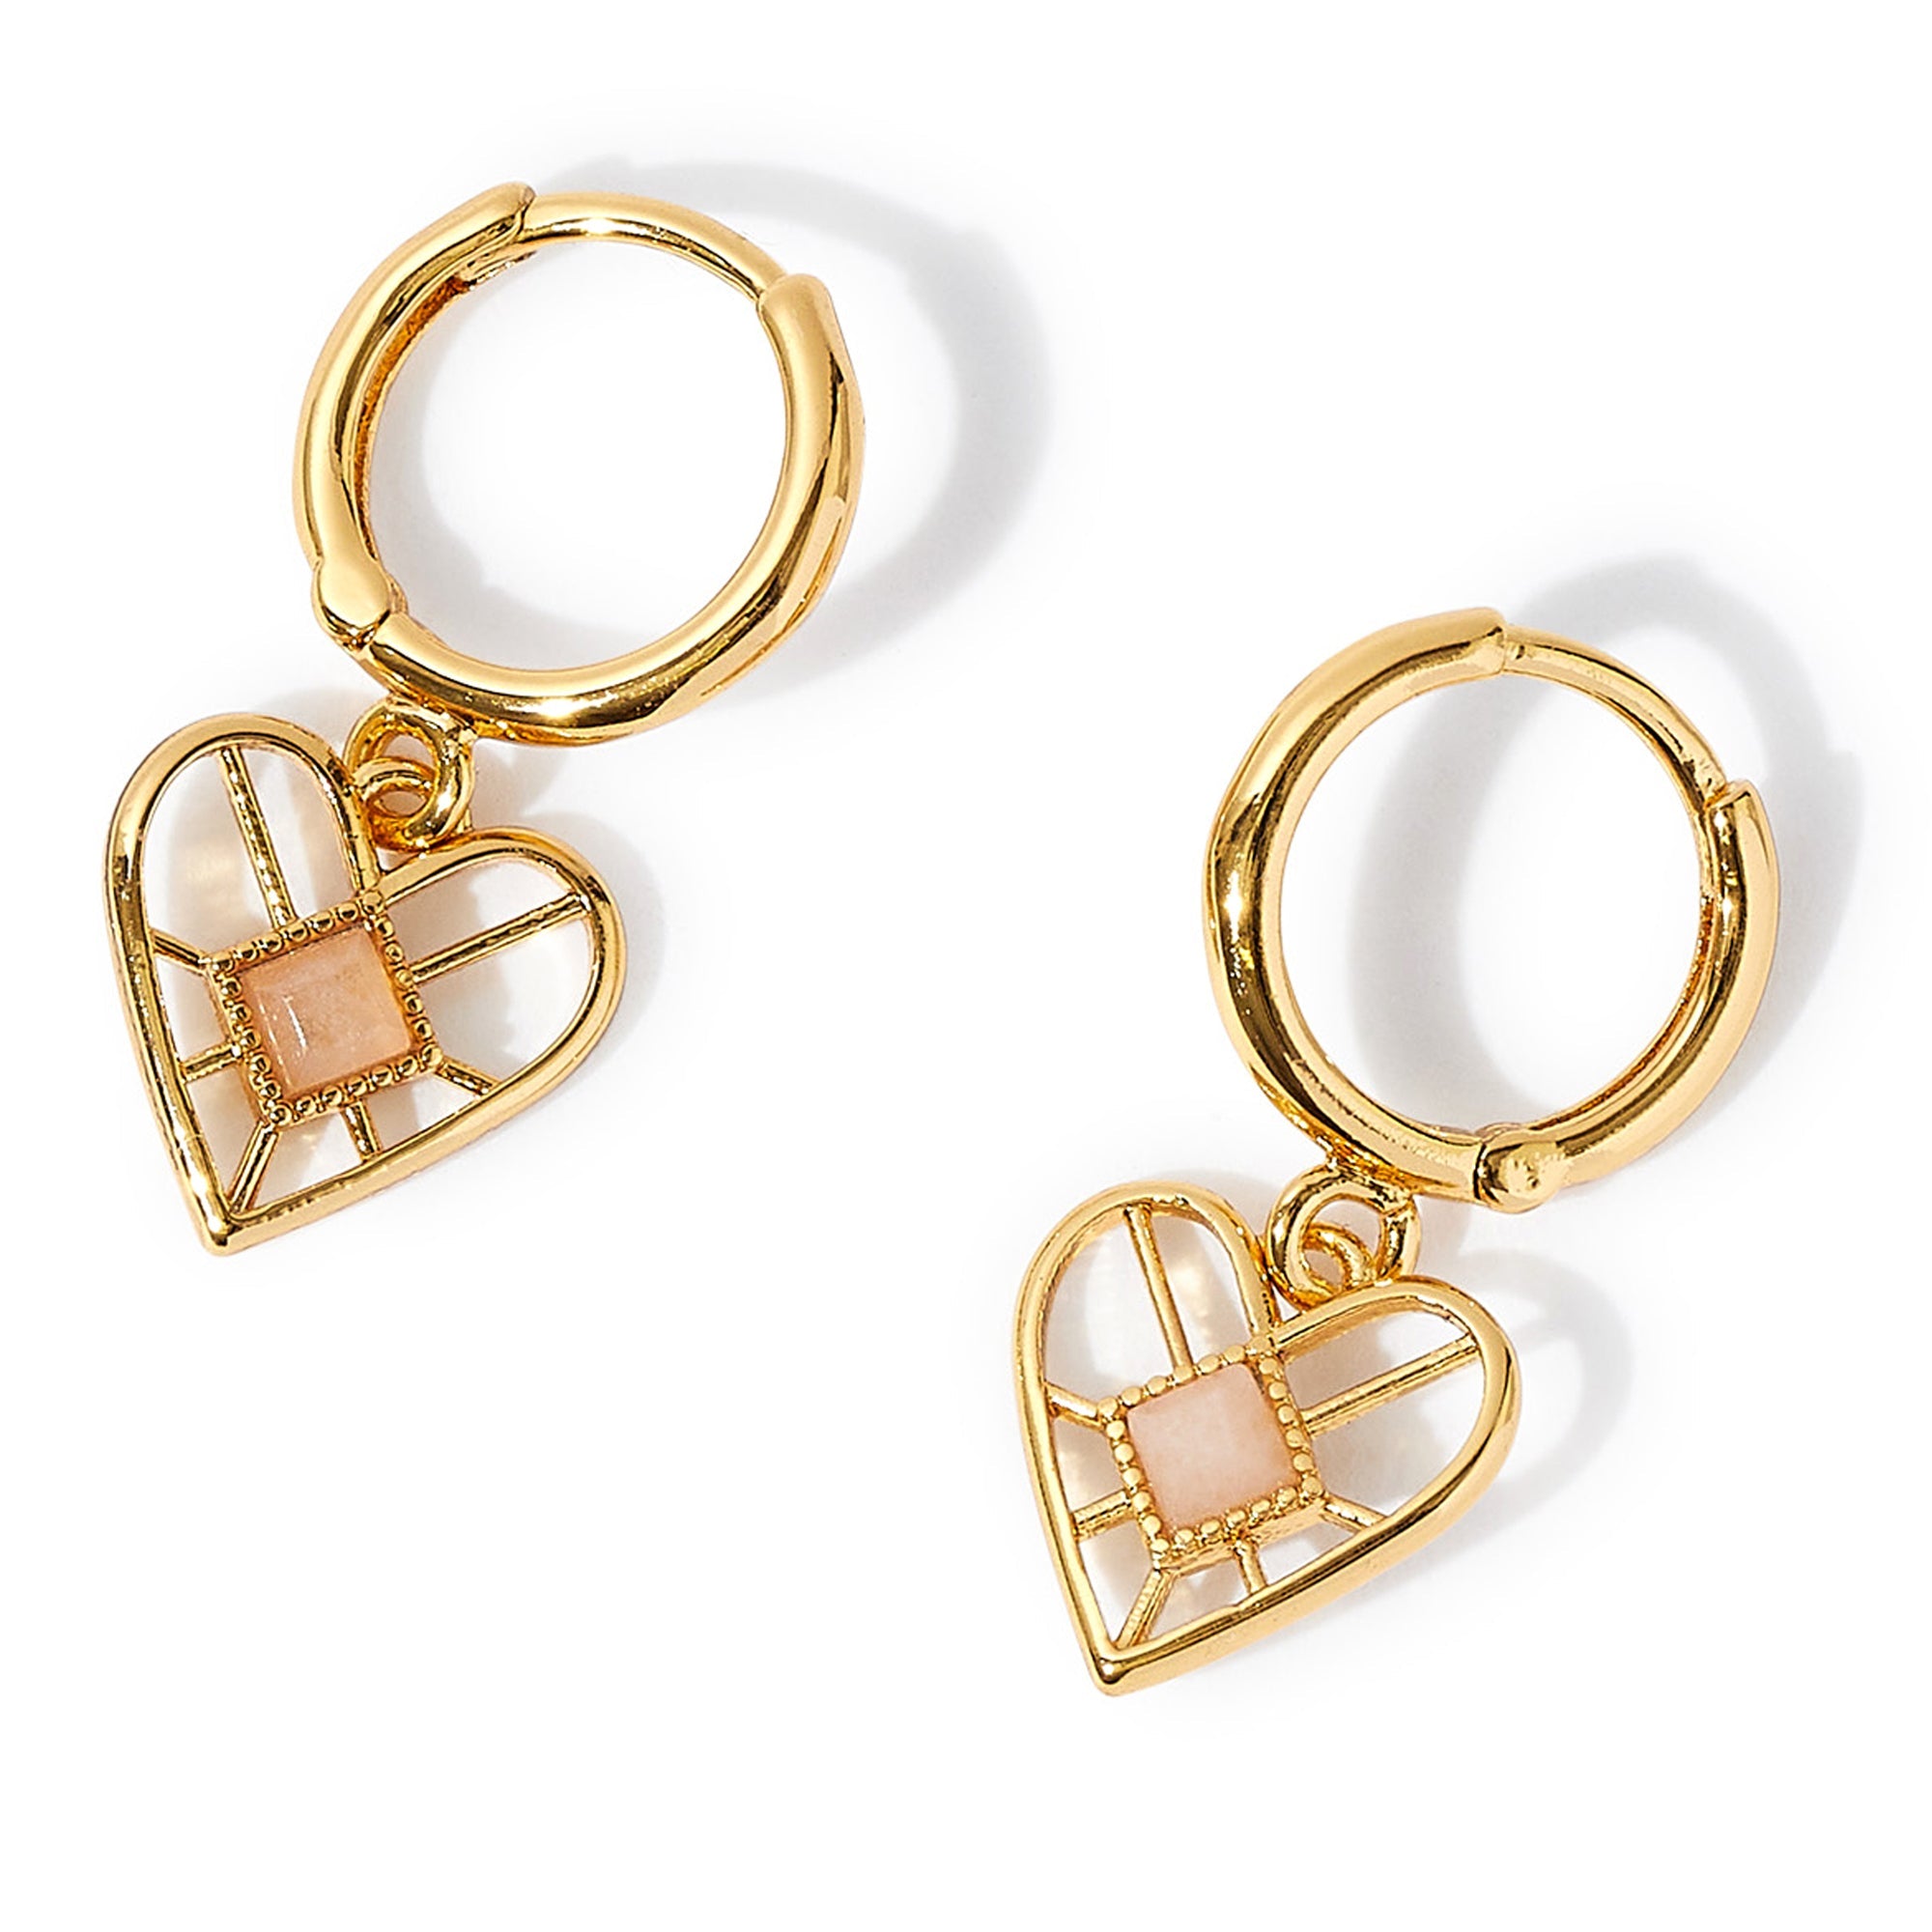 Real Gold Plated Z Power Stone Charm Rose Quartz Huggies Hoop Earrings For Women By Accessorize London